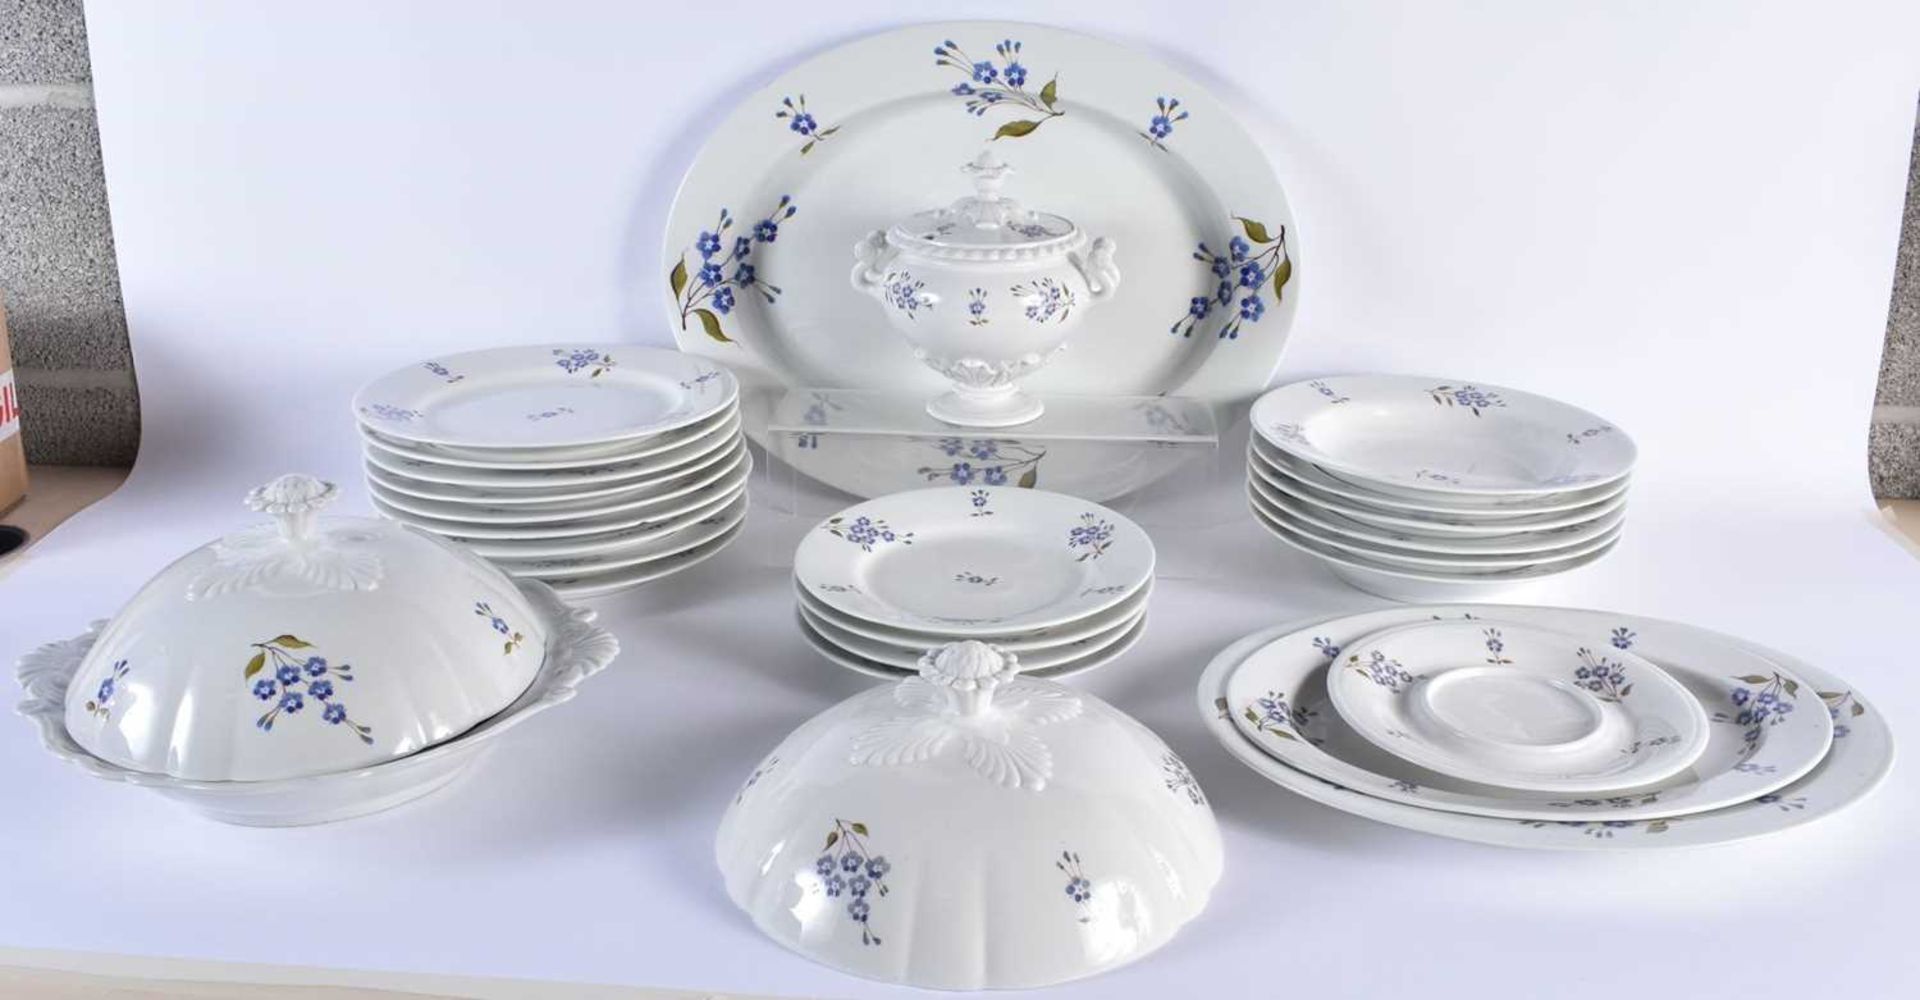 AN EARLY 19TH CENTURY CHAMBERLAINS WORCESTER DINNER SERVICE painted with blue cornflowers. Largest